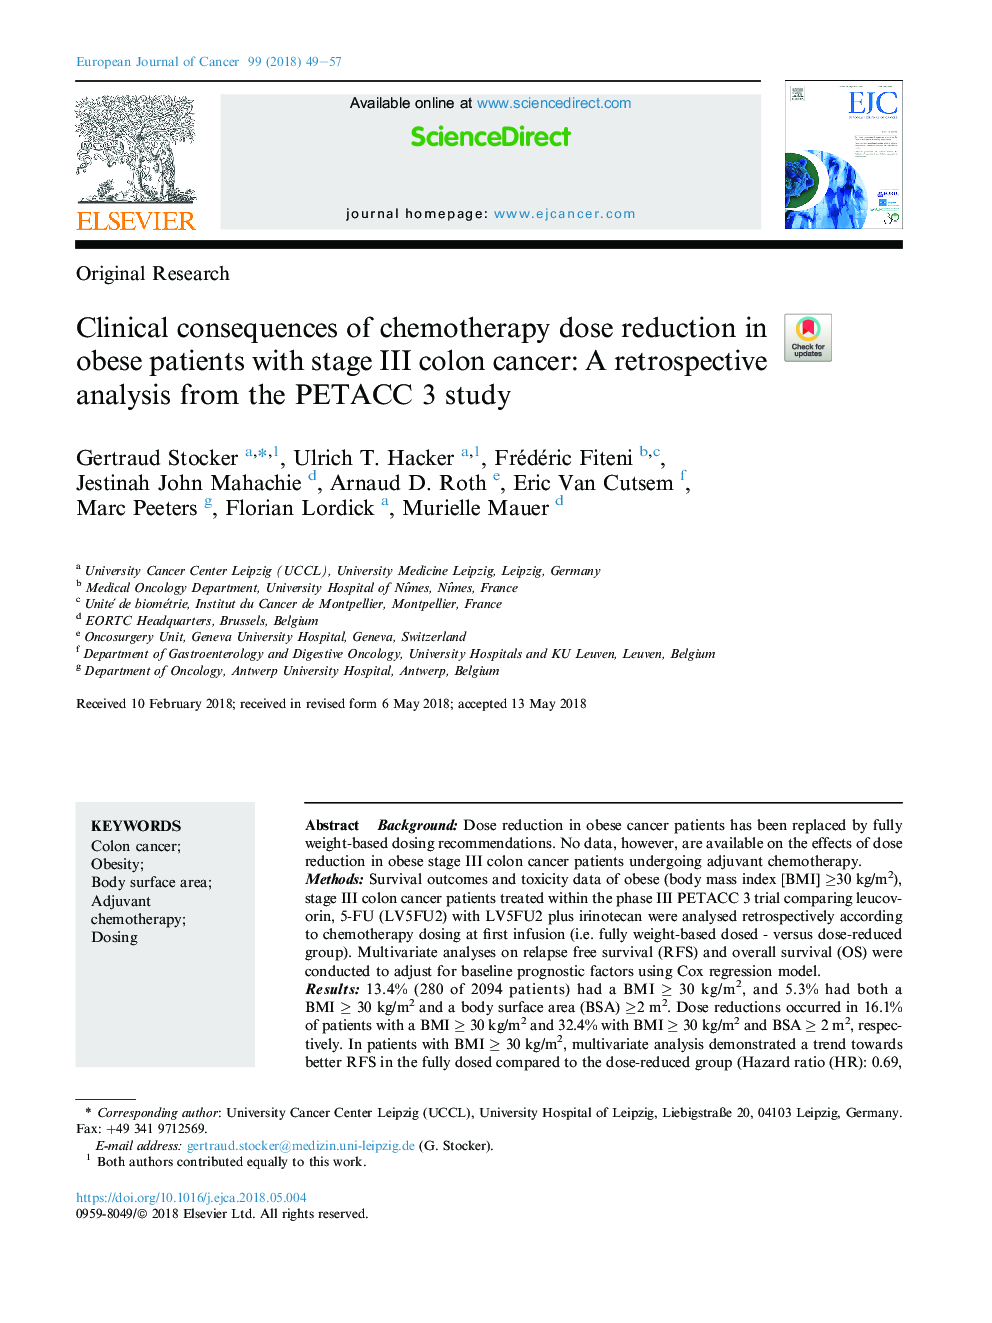 Clinical consequences of chemotherapy dose reduction in obese patients with stage III colon cancer: A retrospective analysis from the PETACC 3 study